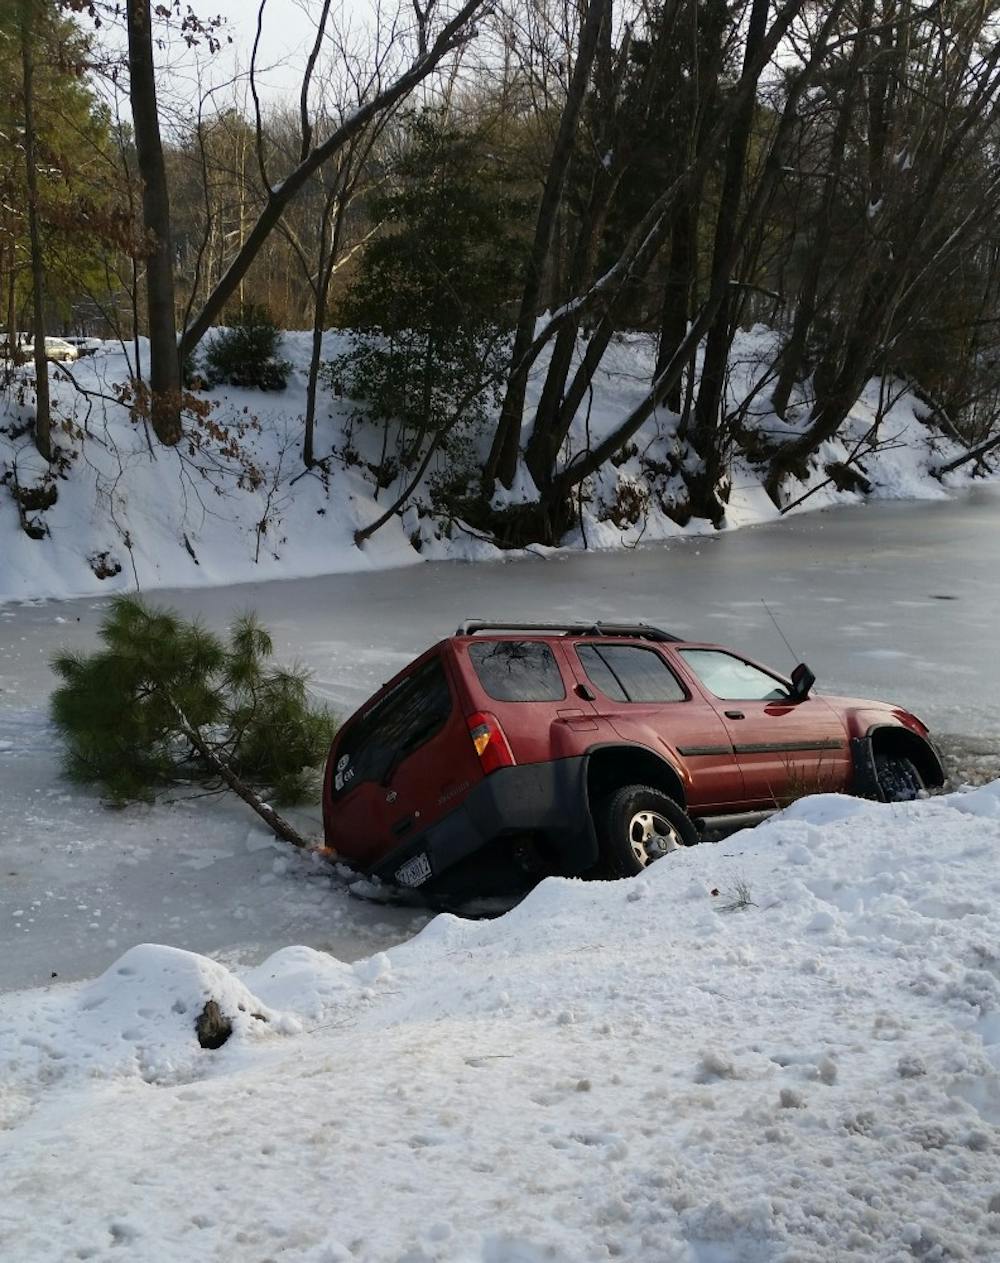 <p>A richmond college student lost control of his vehicle and crashed into Westhampton Lake hours after a blizzard dumped about half a foot of snow onto Richmond's campus.</p>